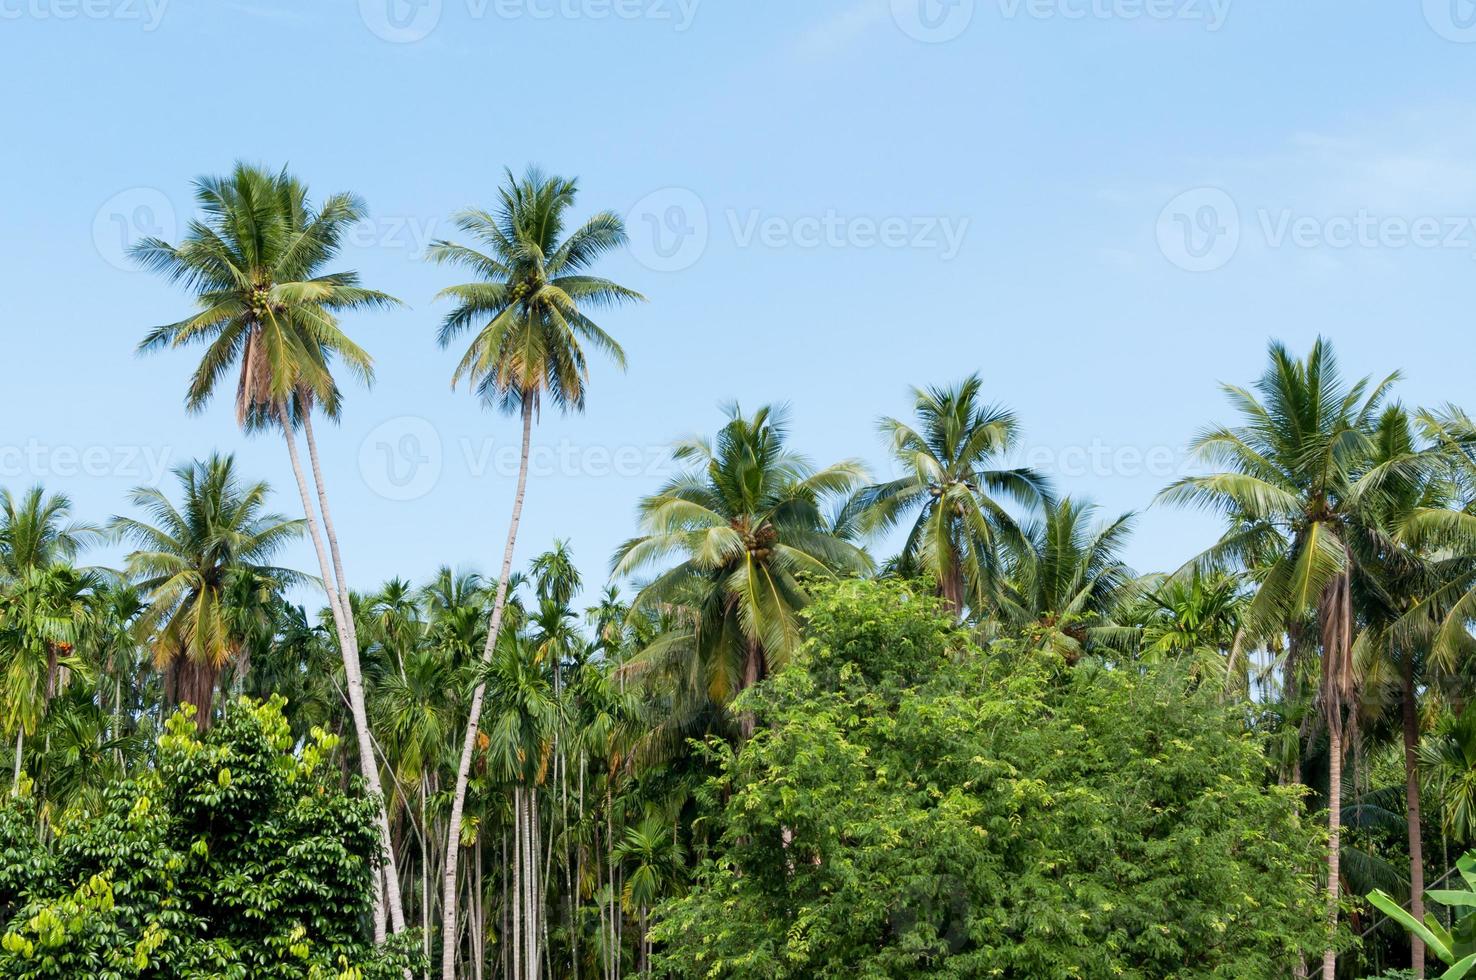 Beautiful two coconut palms trees in the Tropical forest with blue sky at Island in Thailand photo